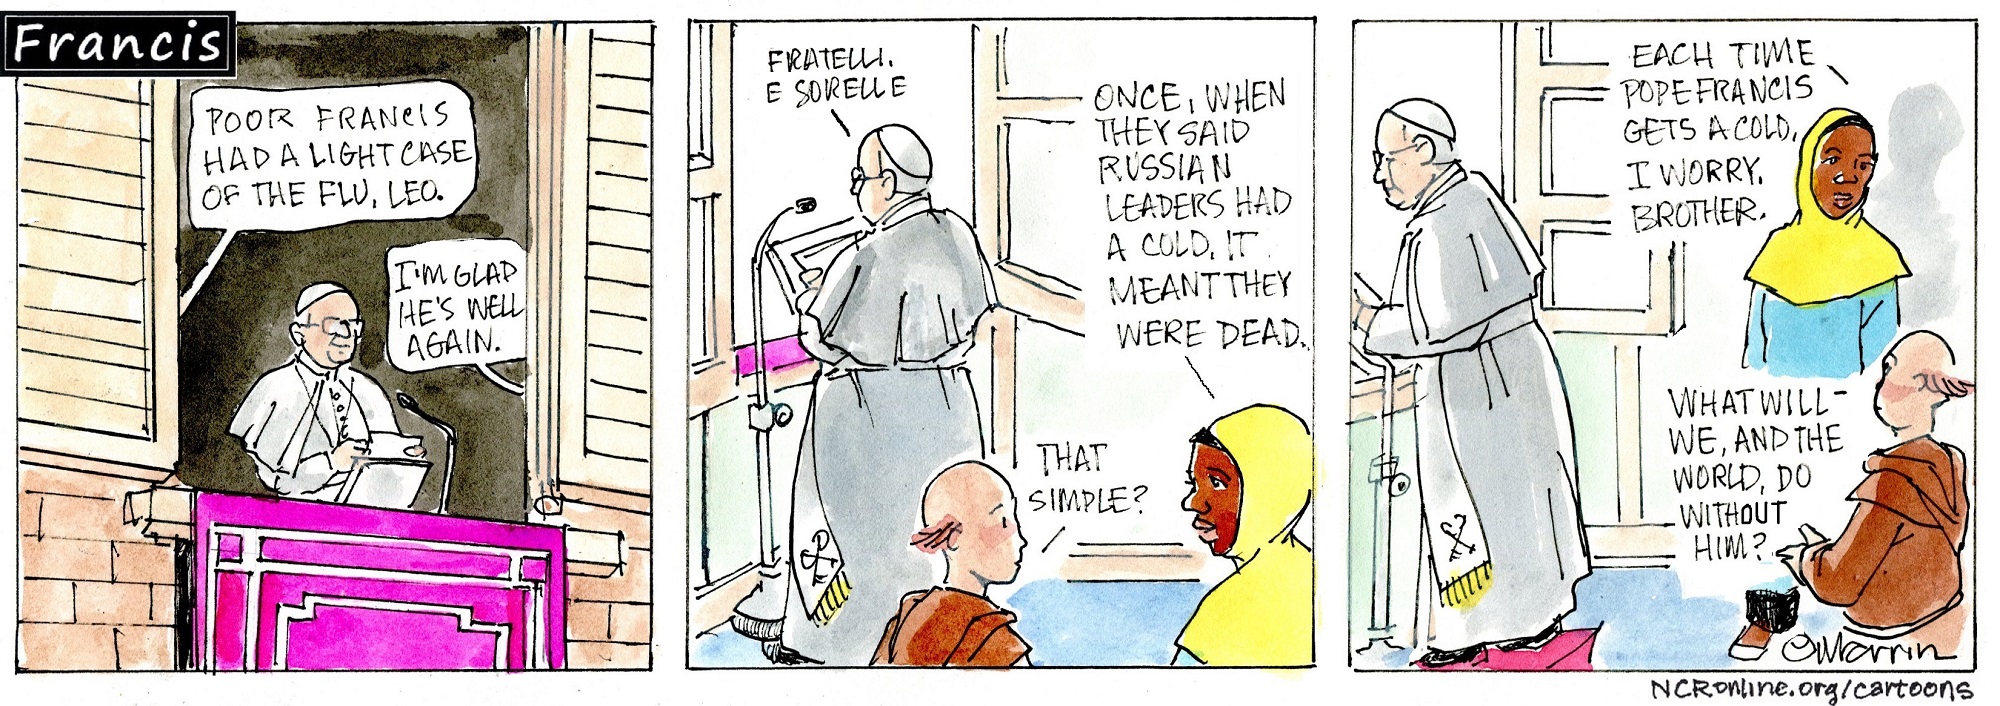 Francis, the comic strip: Francis caught the flu, and Gabby is glad he is feeling better.